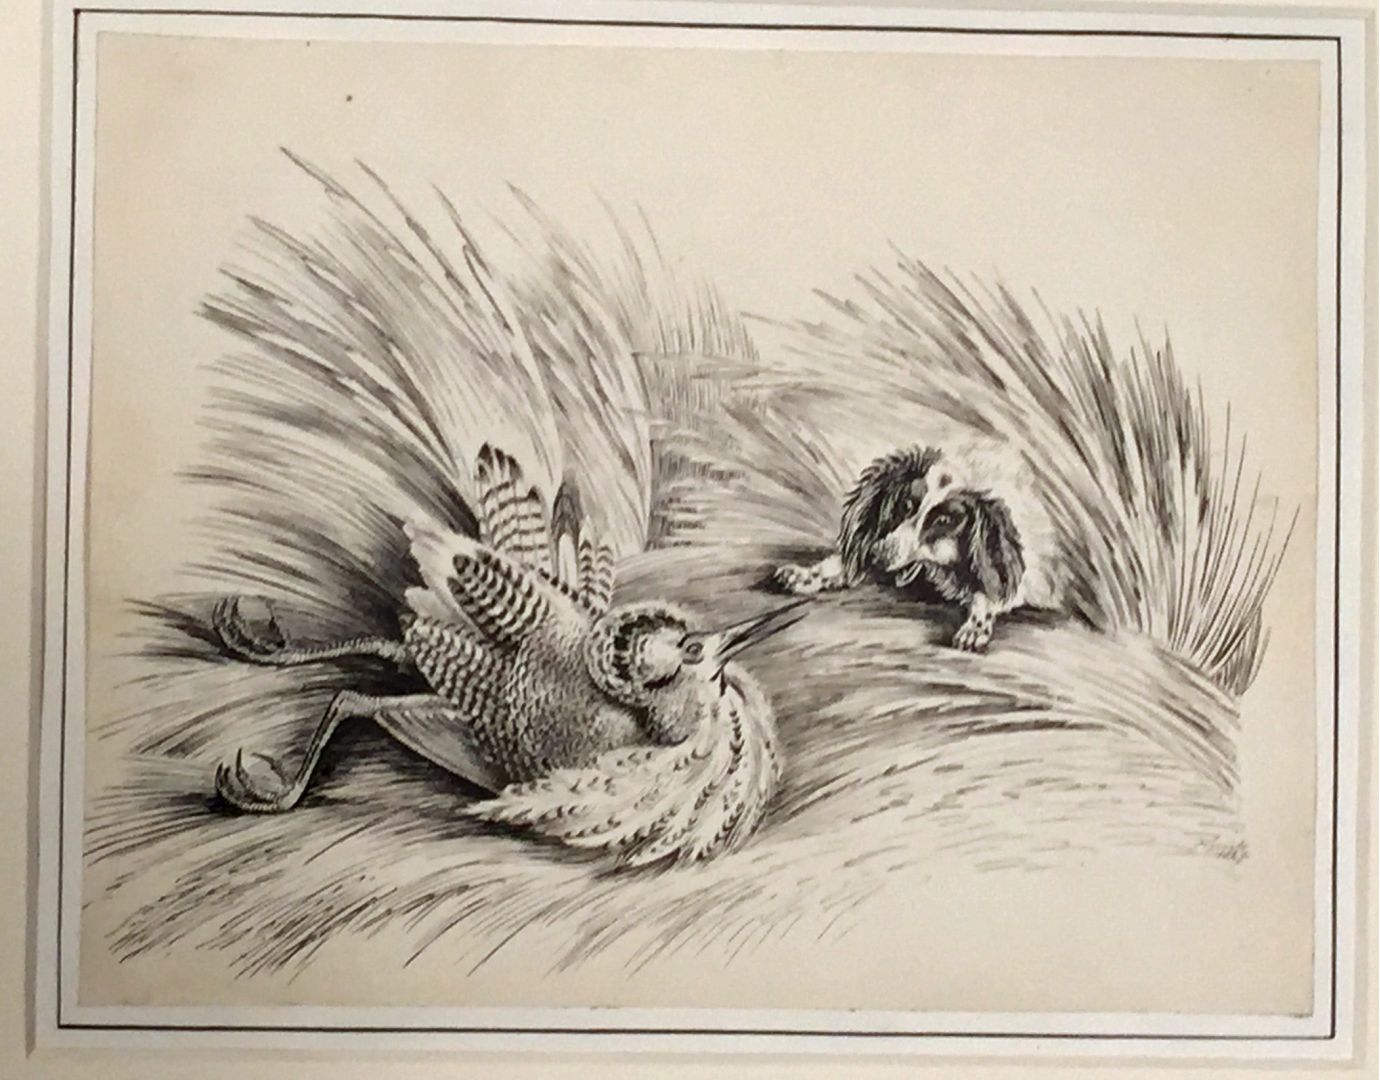 UNTITLED DRAWING OF A DOG AND BIRD